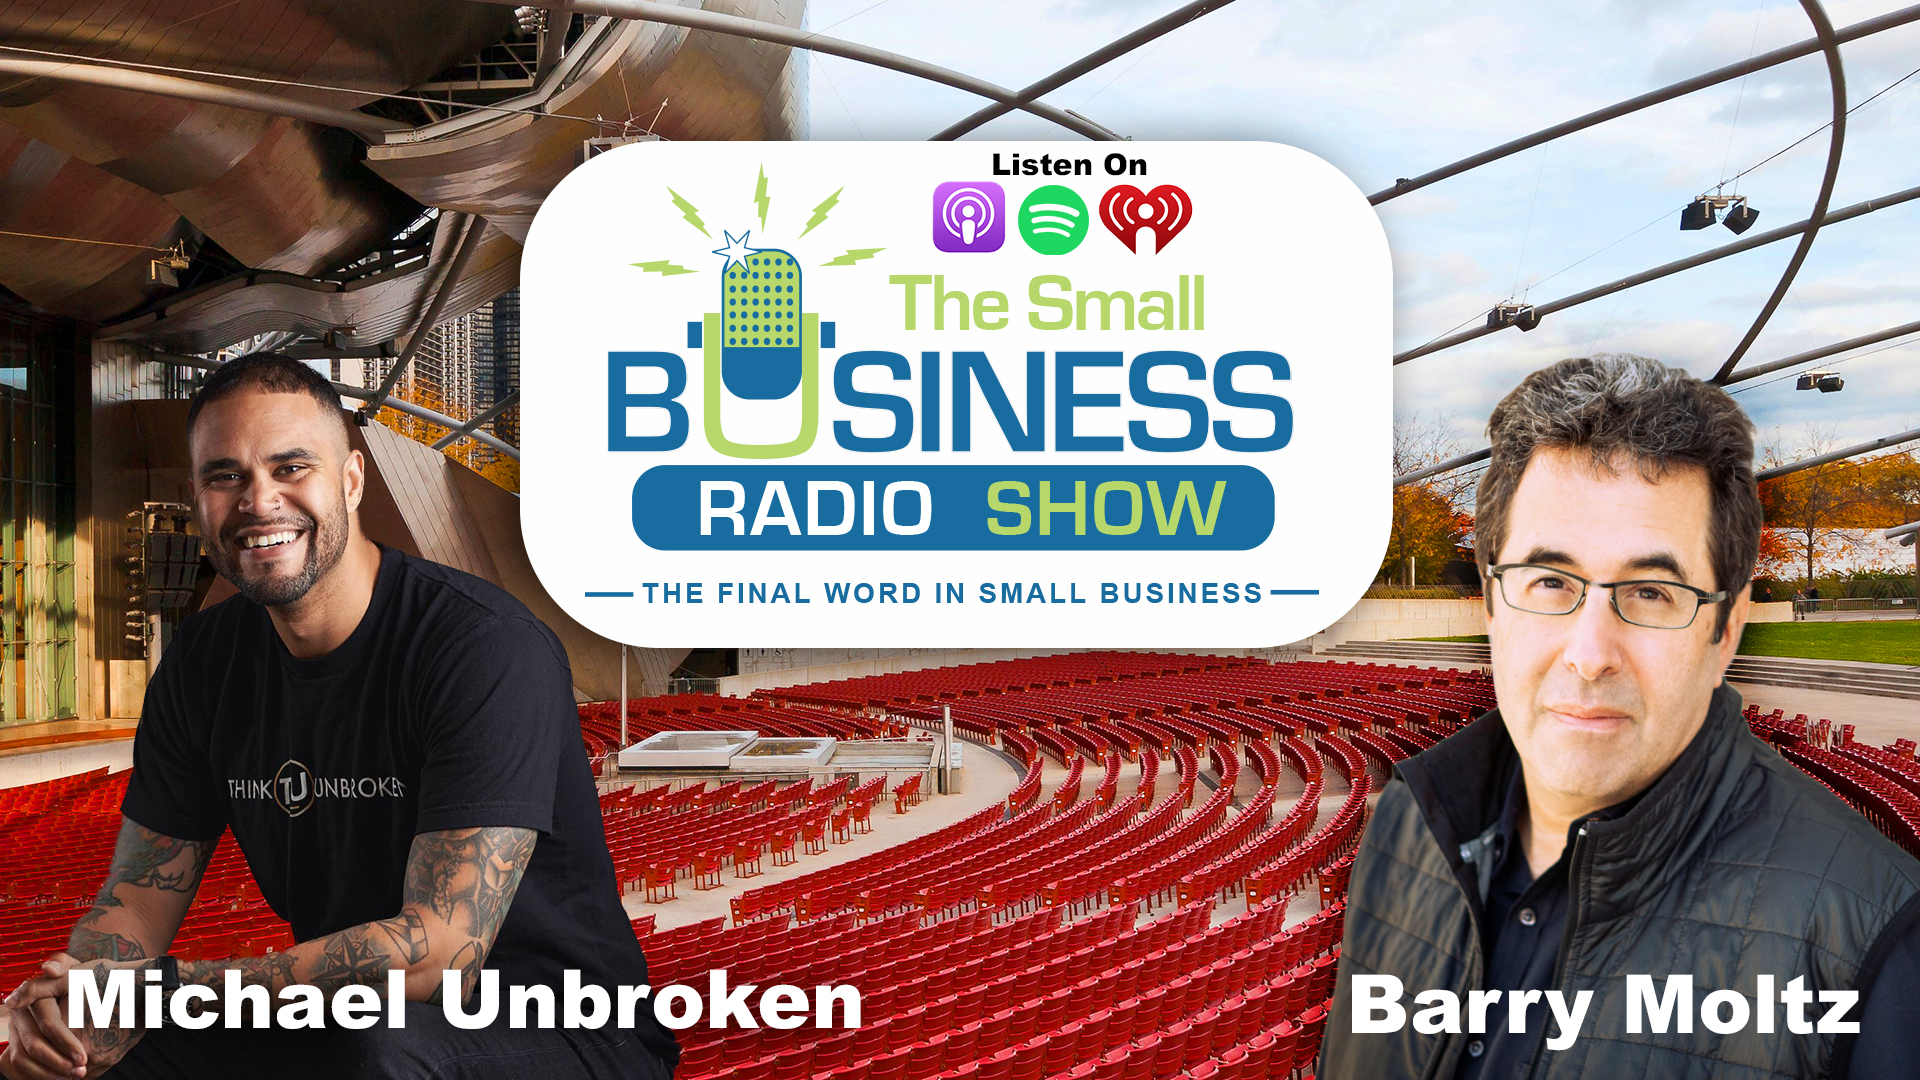 Michael Unbroken on The Small Business Radio Show